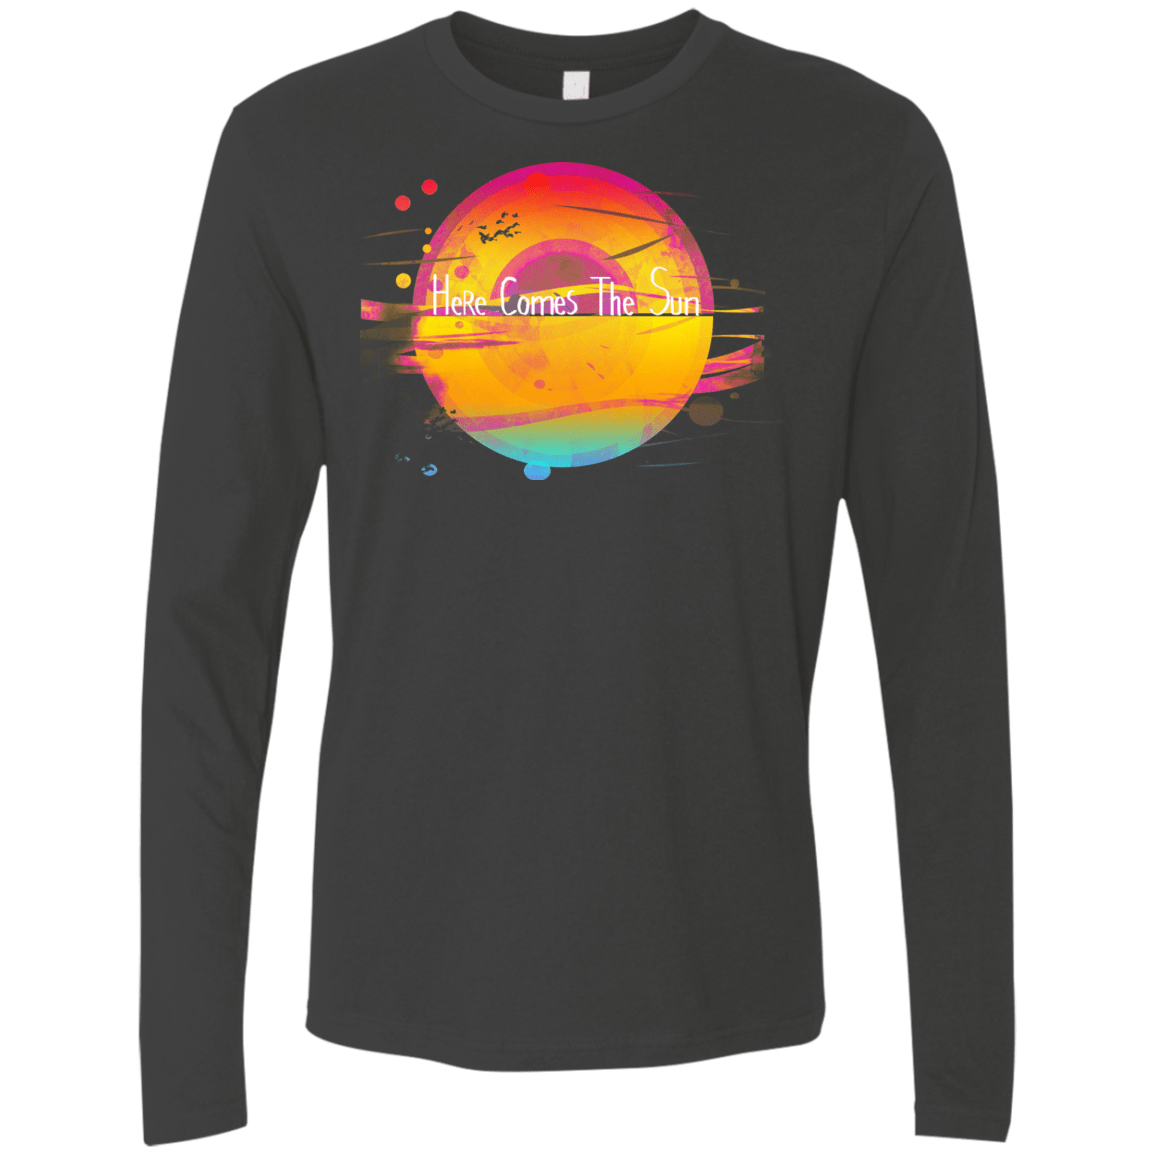 T-Shirts Heavy Metal / S Here Comes The Sun (2) Men's Premium Long Sleeve